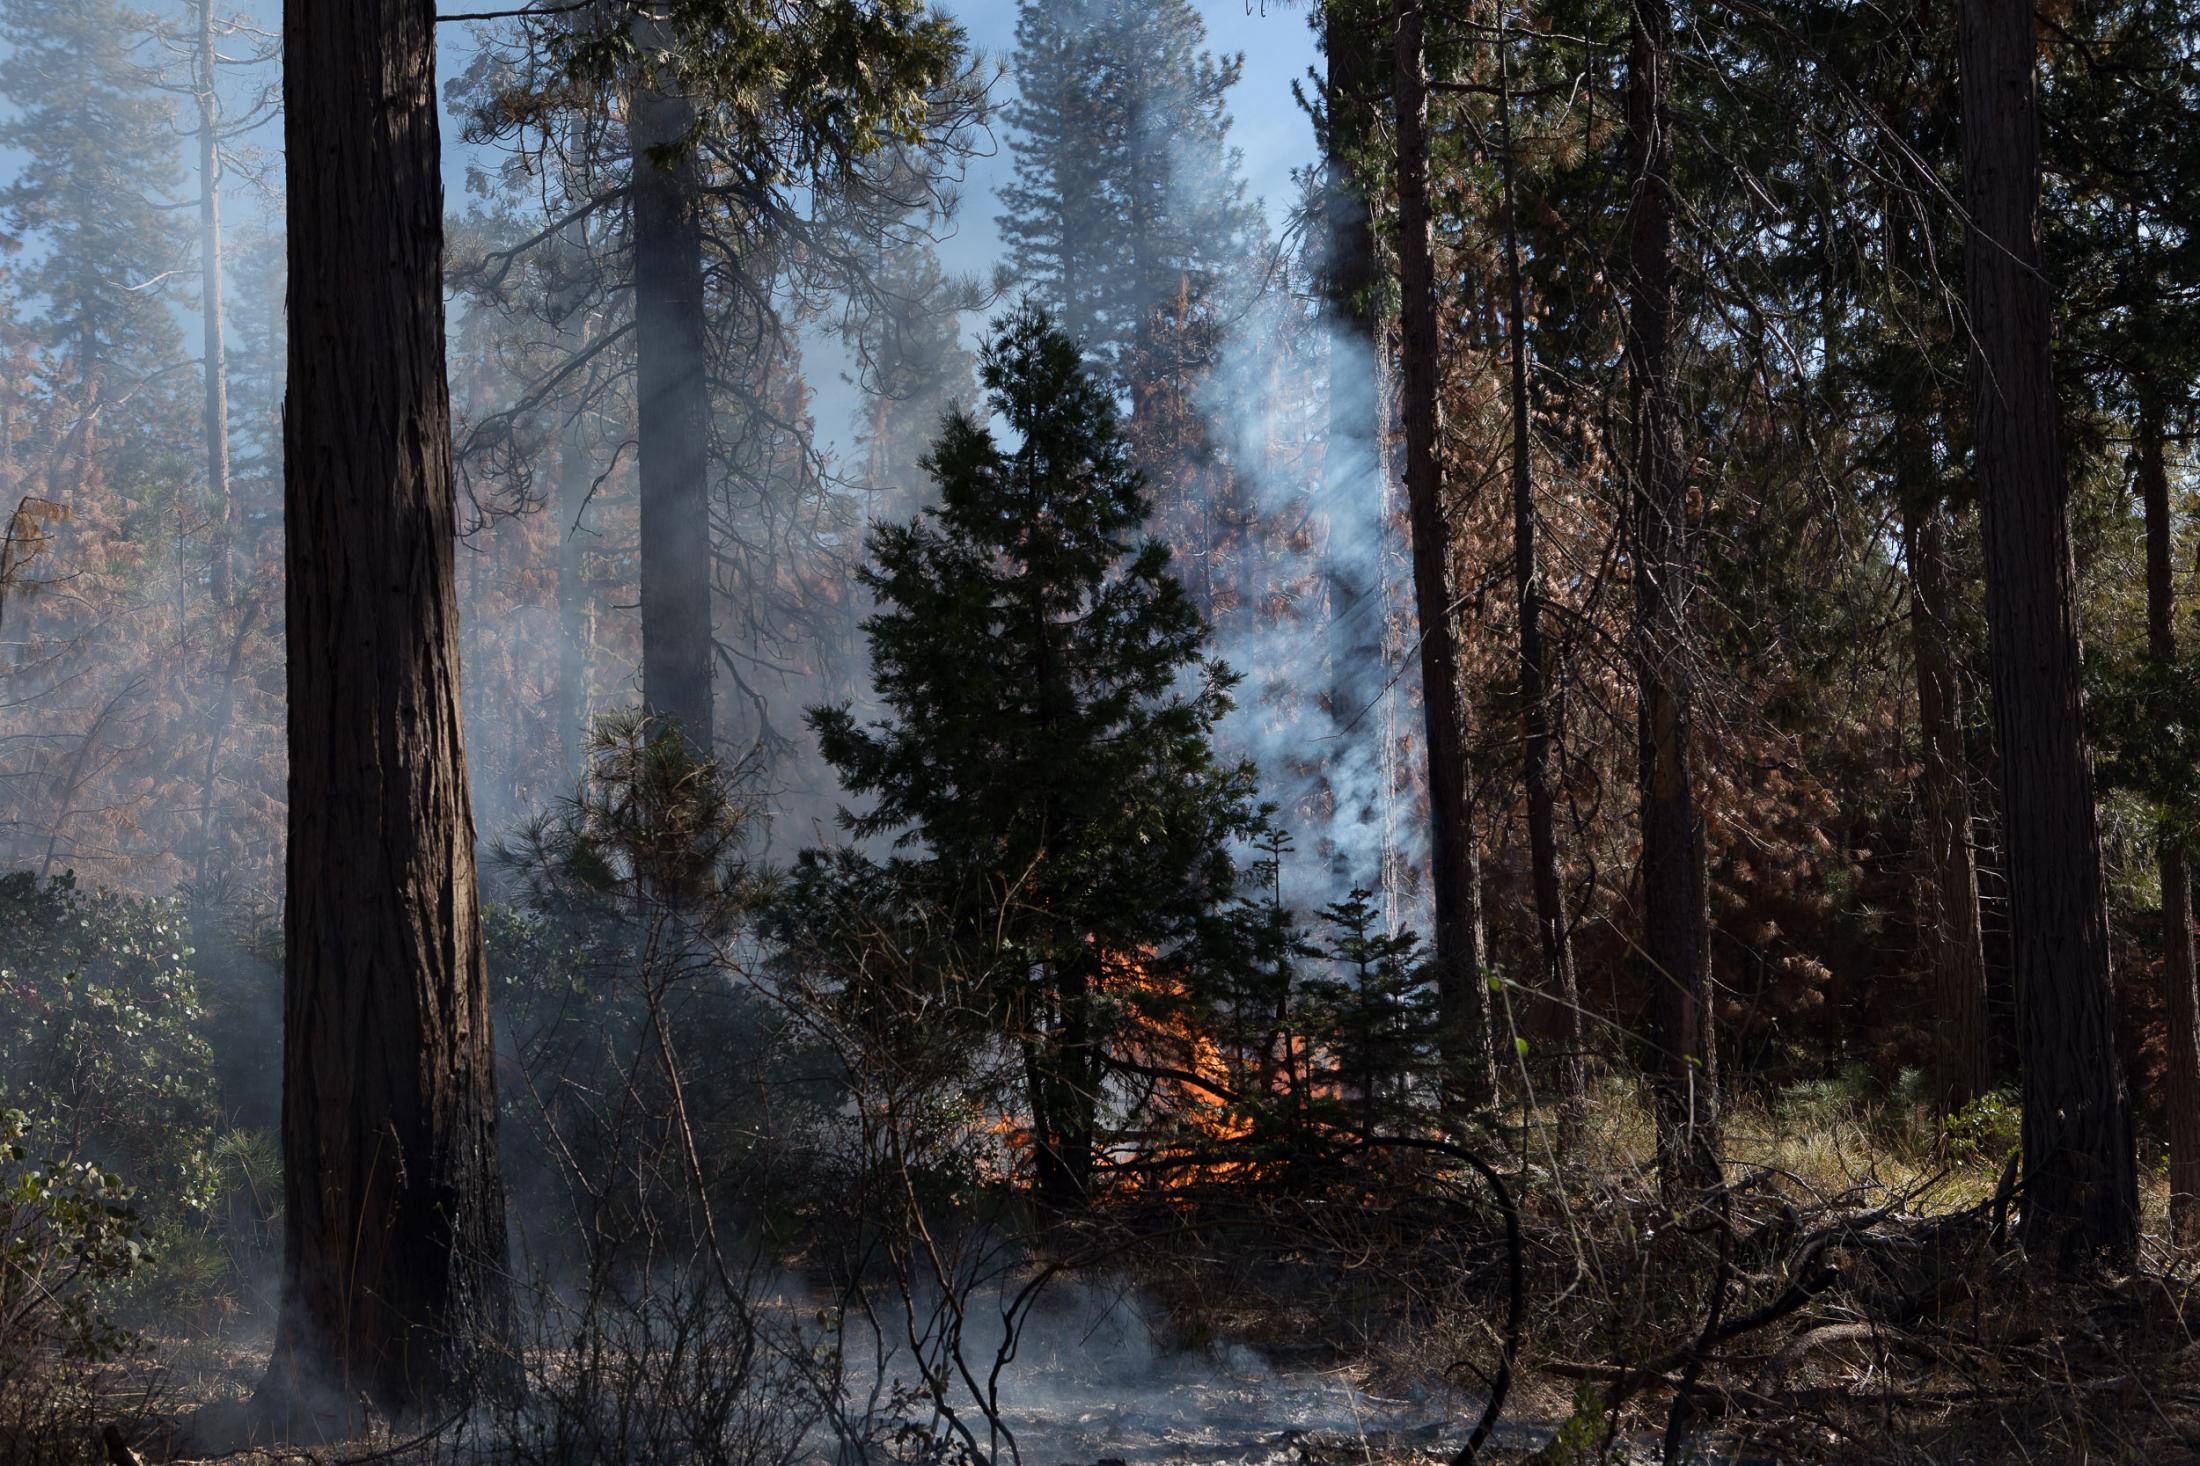  - Prescribed burns  - The prescribed fire burns thought the undergrowth,...